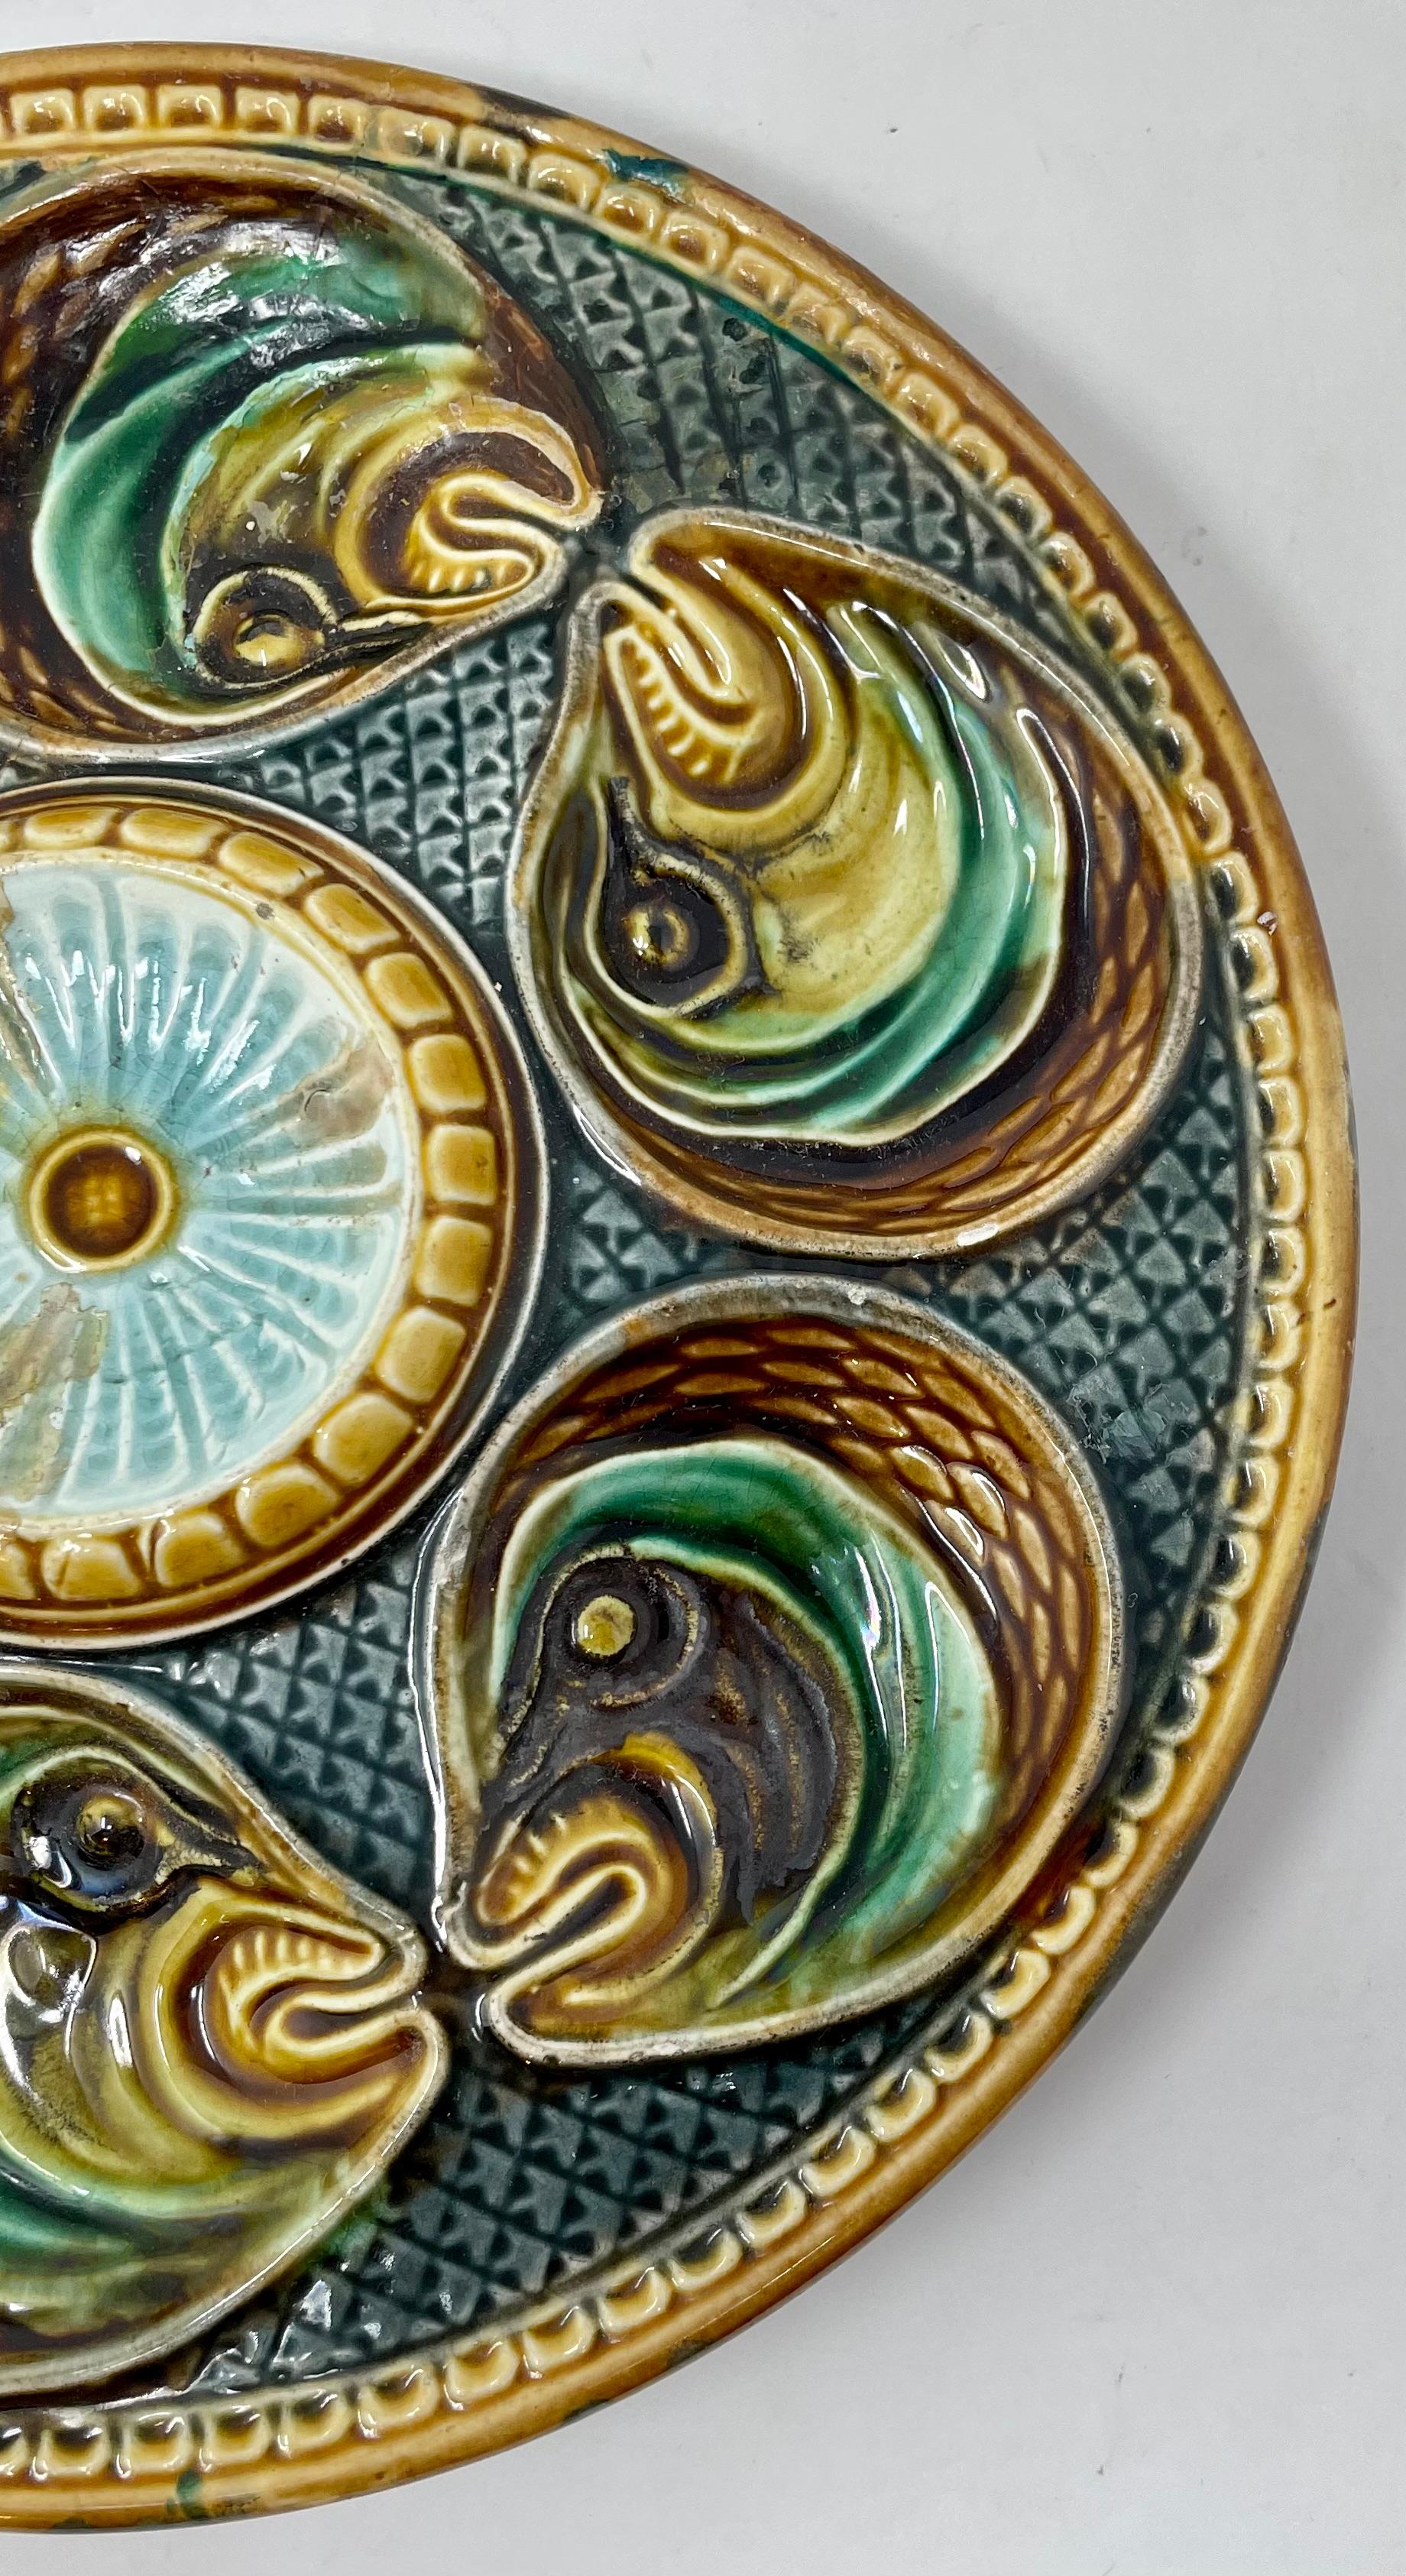 Antique French Faience Palissy Ware porcelain fish-head oyster plate, circa 1890.